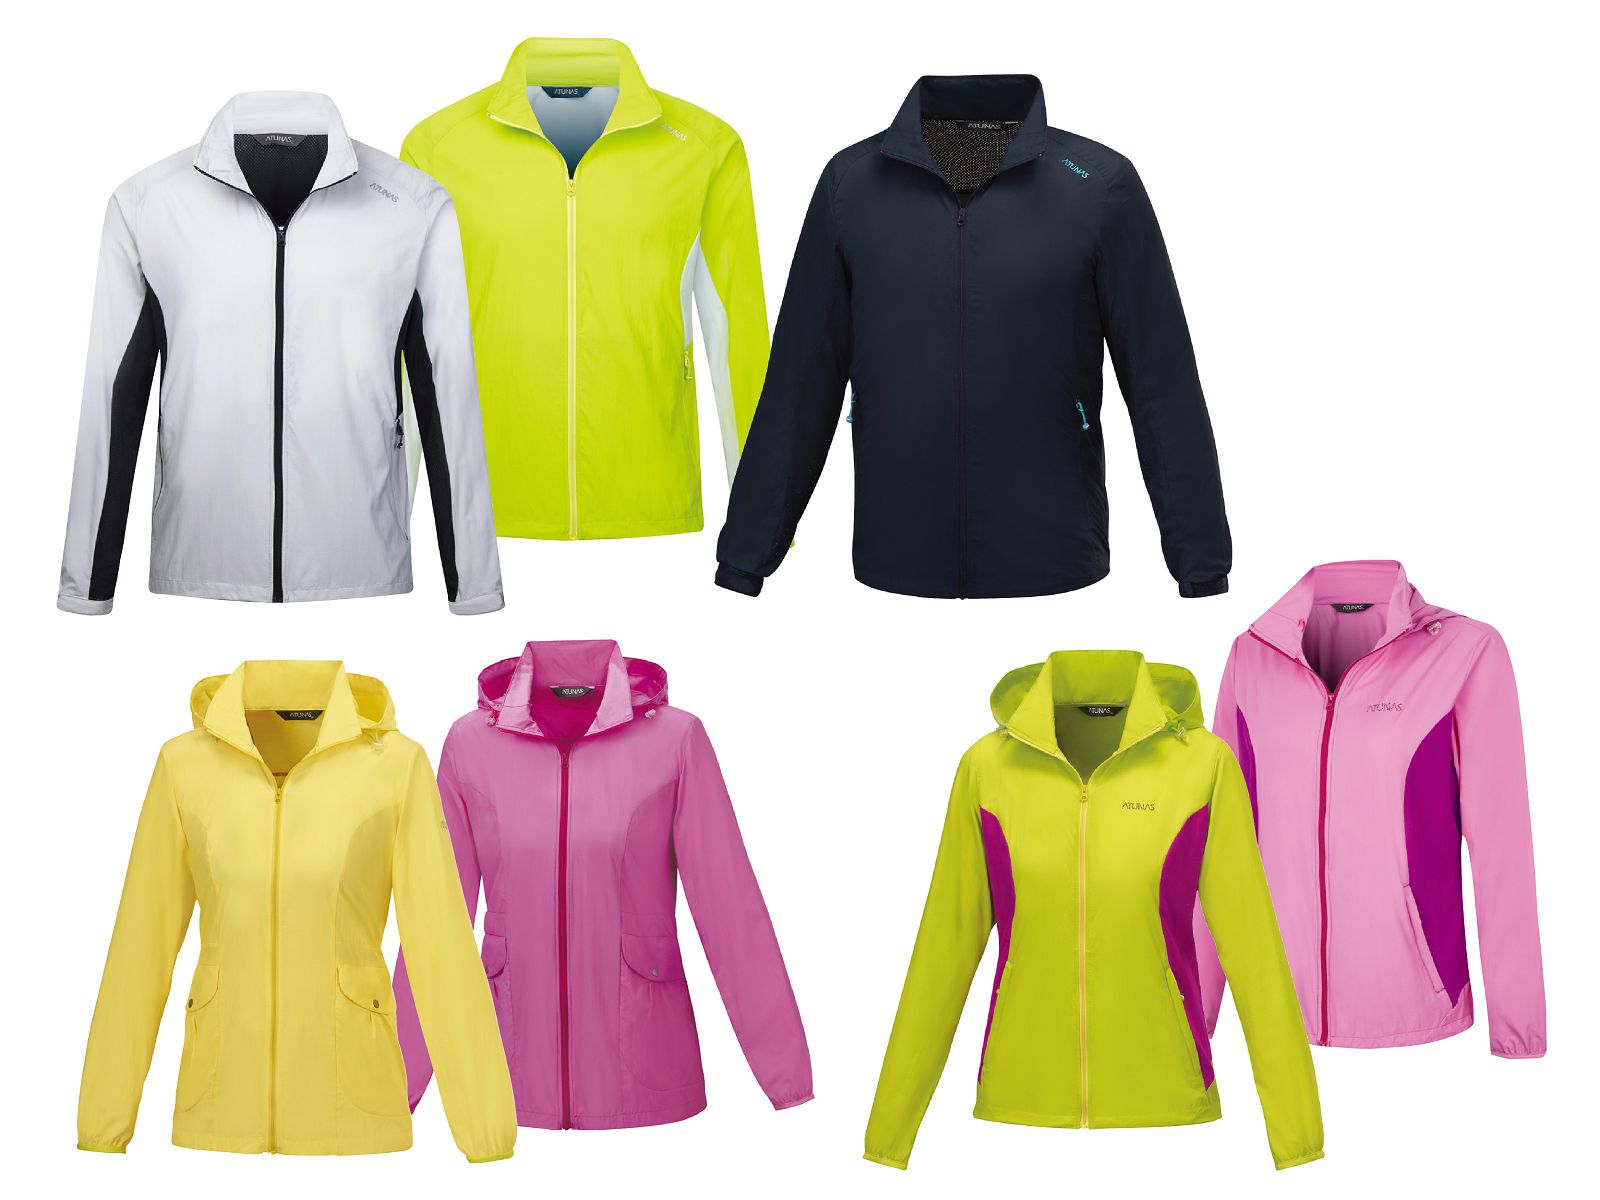 Insect Repellent Lightweight Jacket